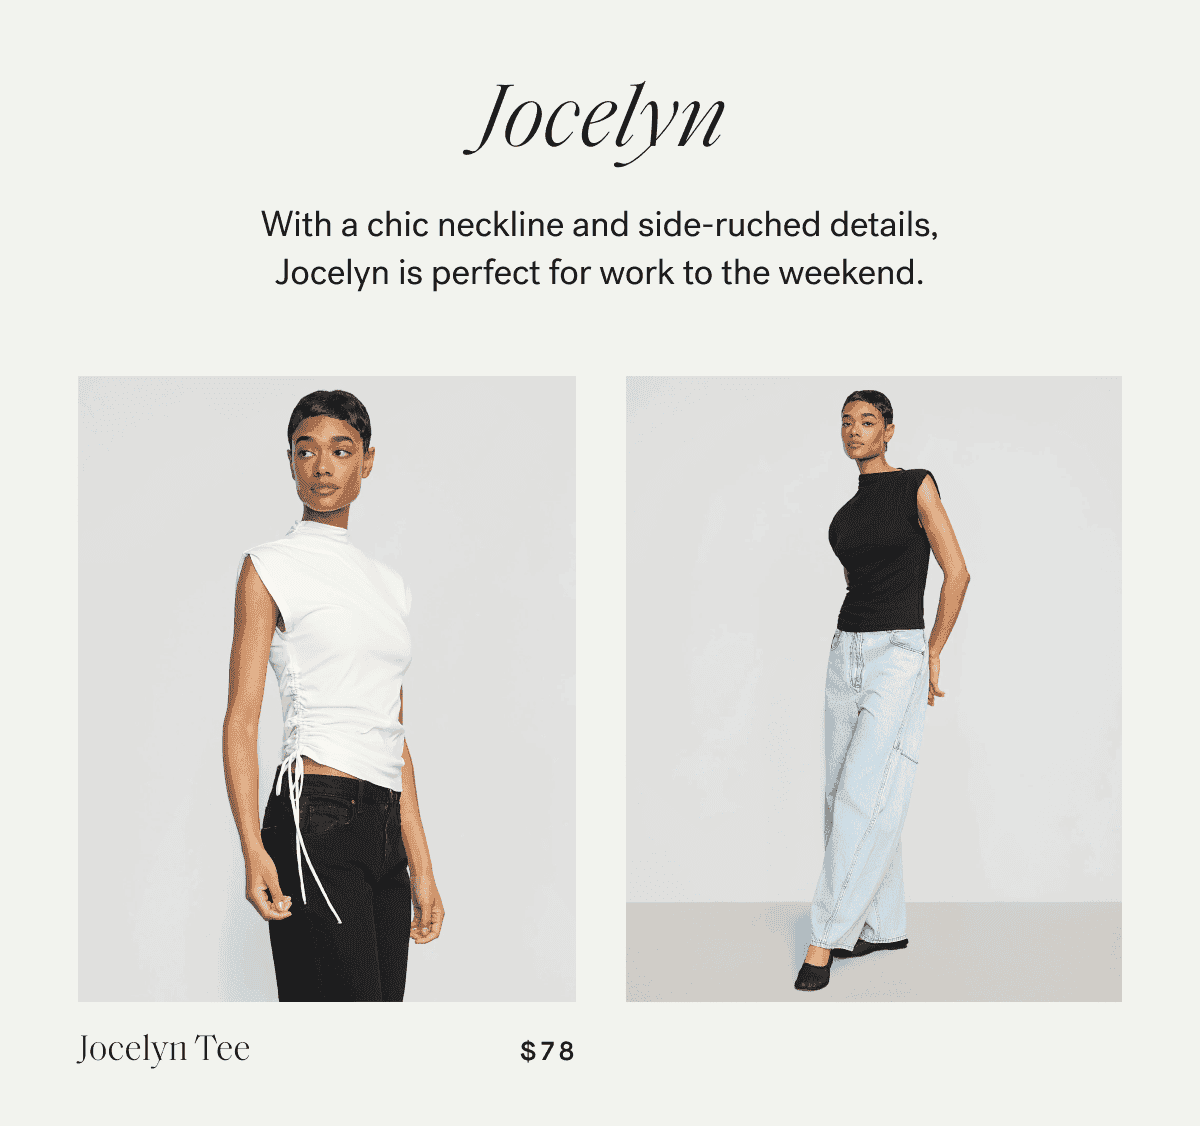 Jocelyn —\xa0With a chic neckline and side-ruched details, Jocelyn is perfect for work to the weekend.